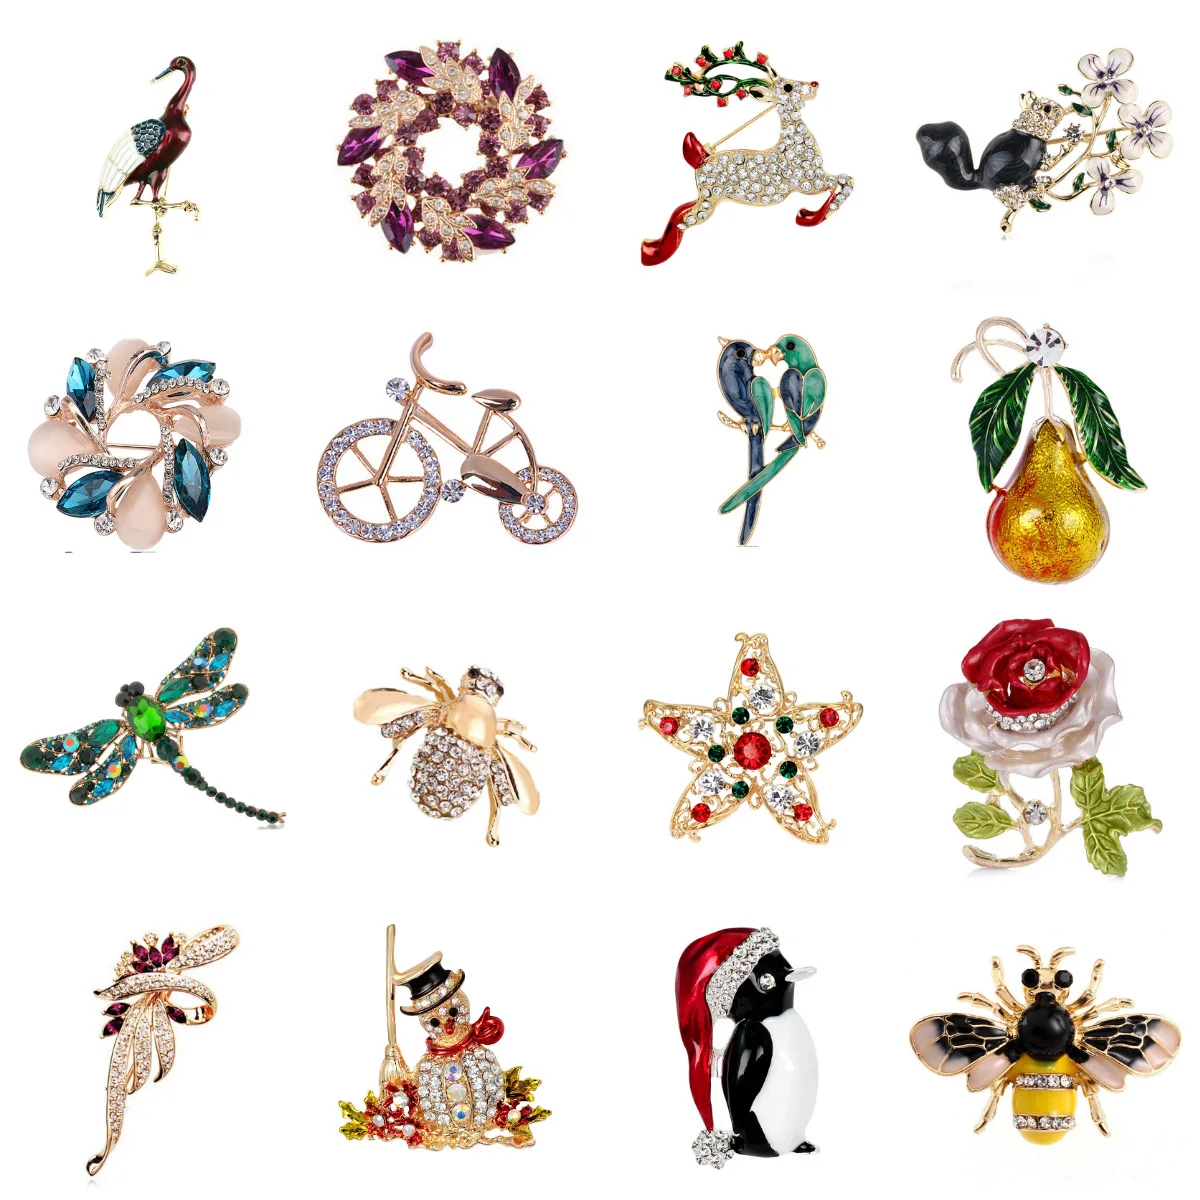 

Bicycle Squirrel Owl Rose Flower Fish Elephant Bird Brooch Collar Pins Corsage Animal Badges Jewelry Women Kids Brooches